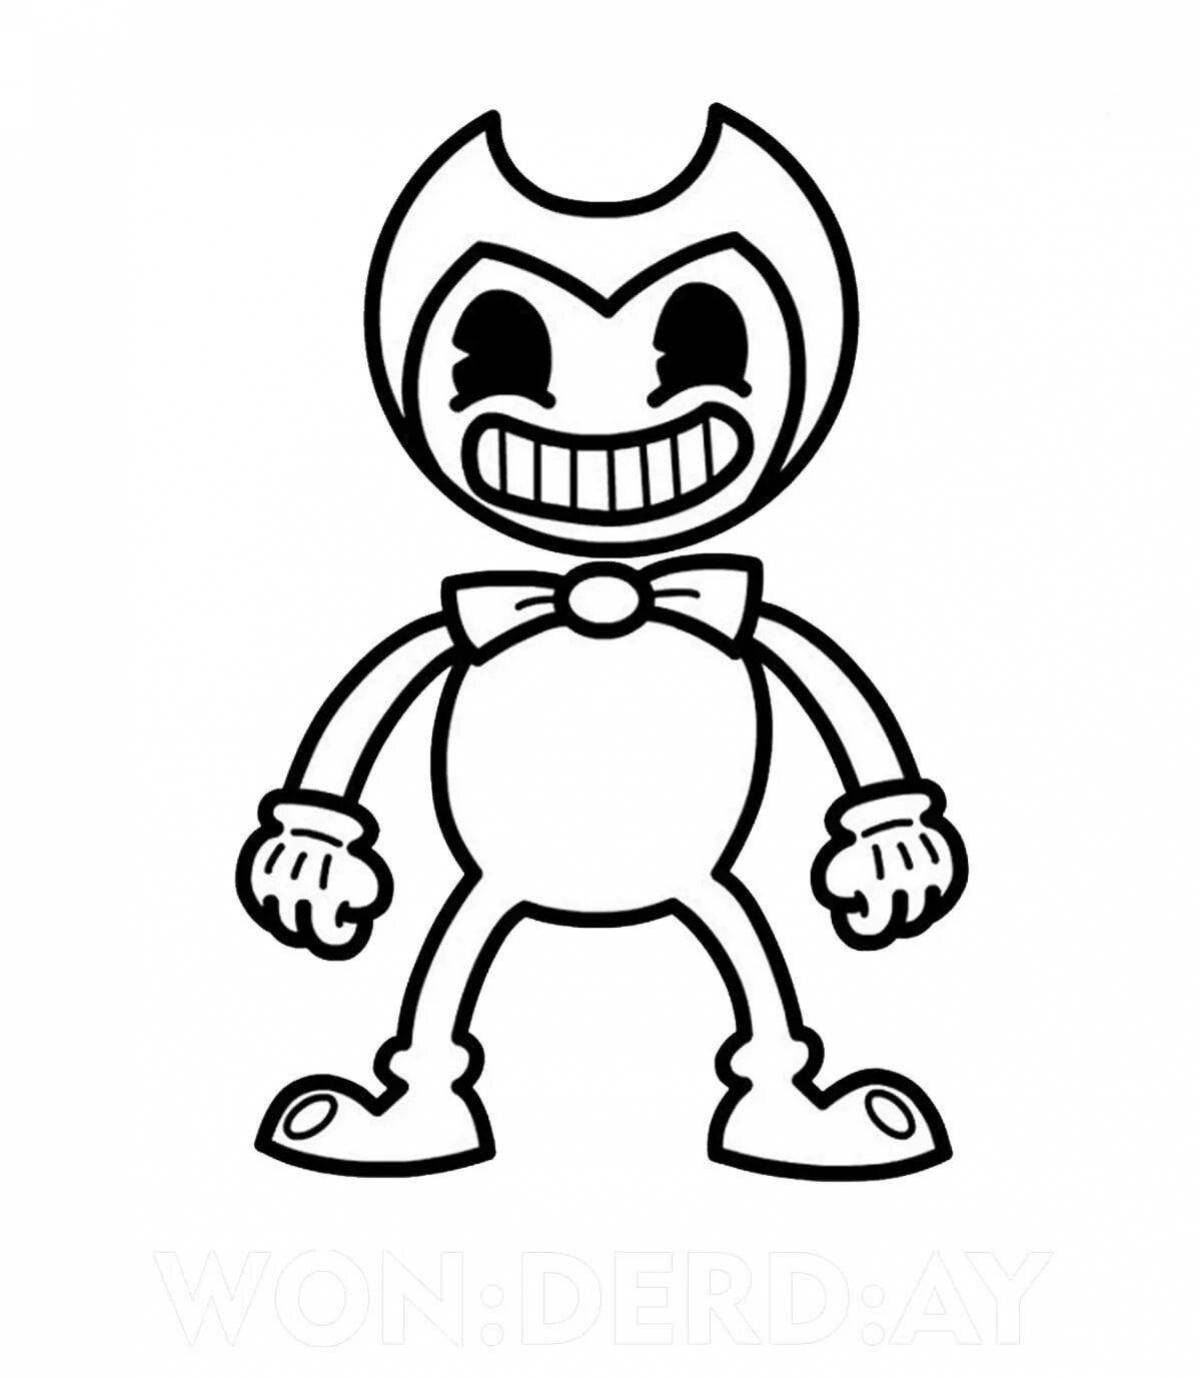 Awesome bendy coloring page